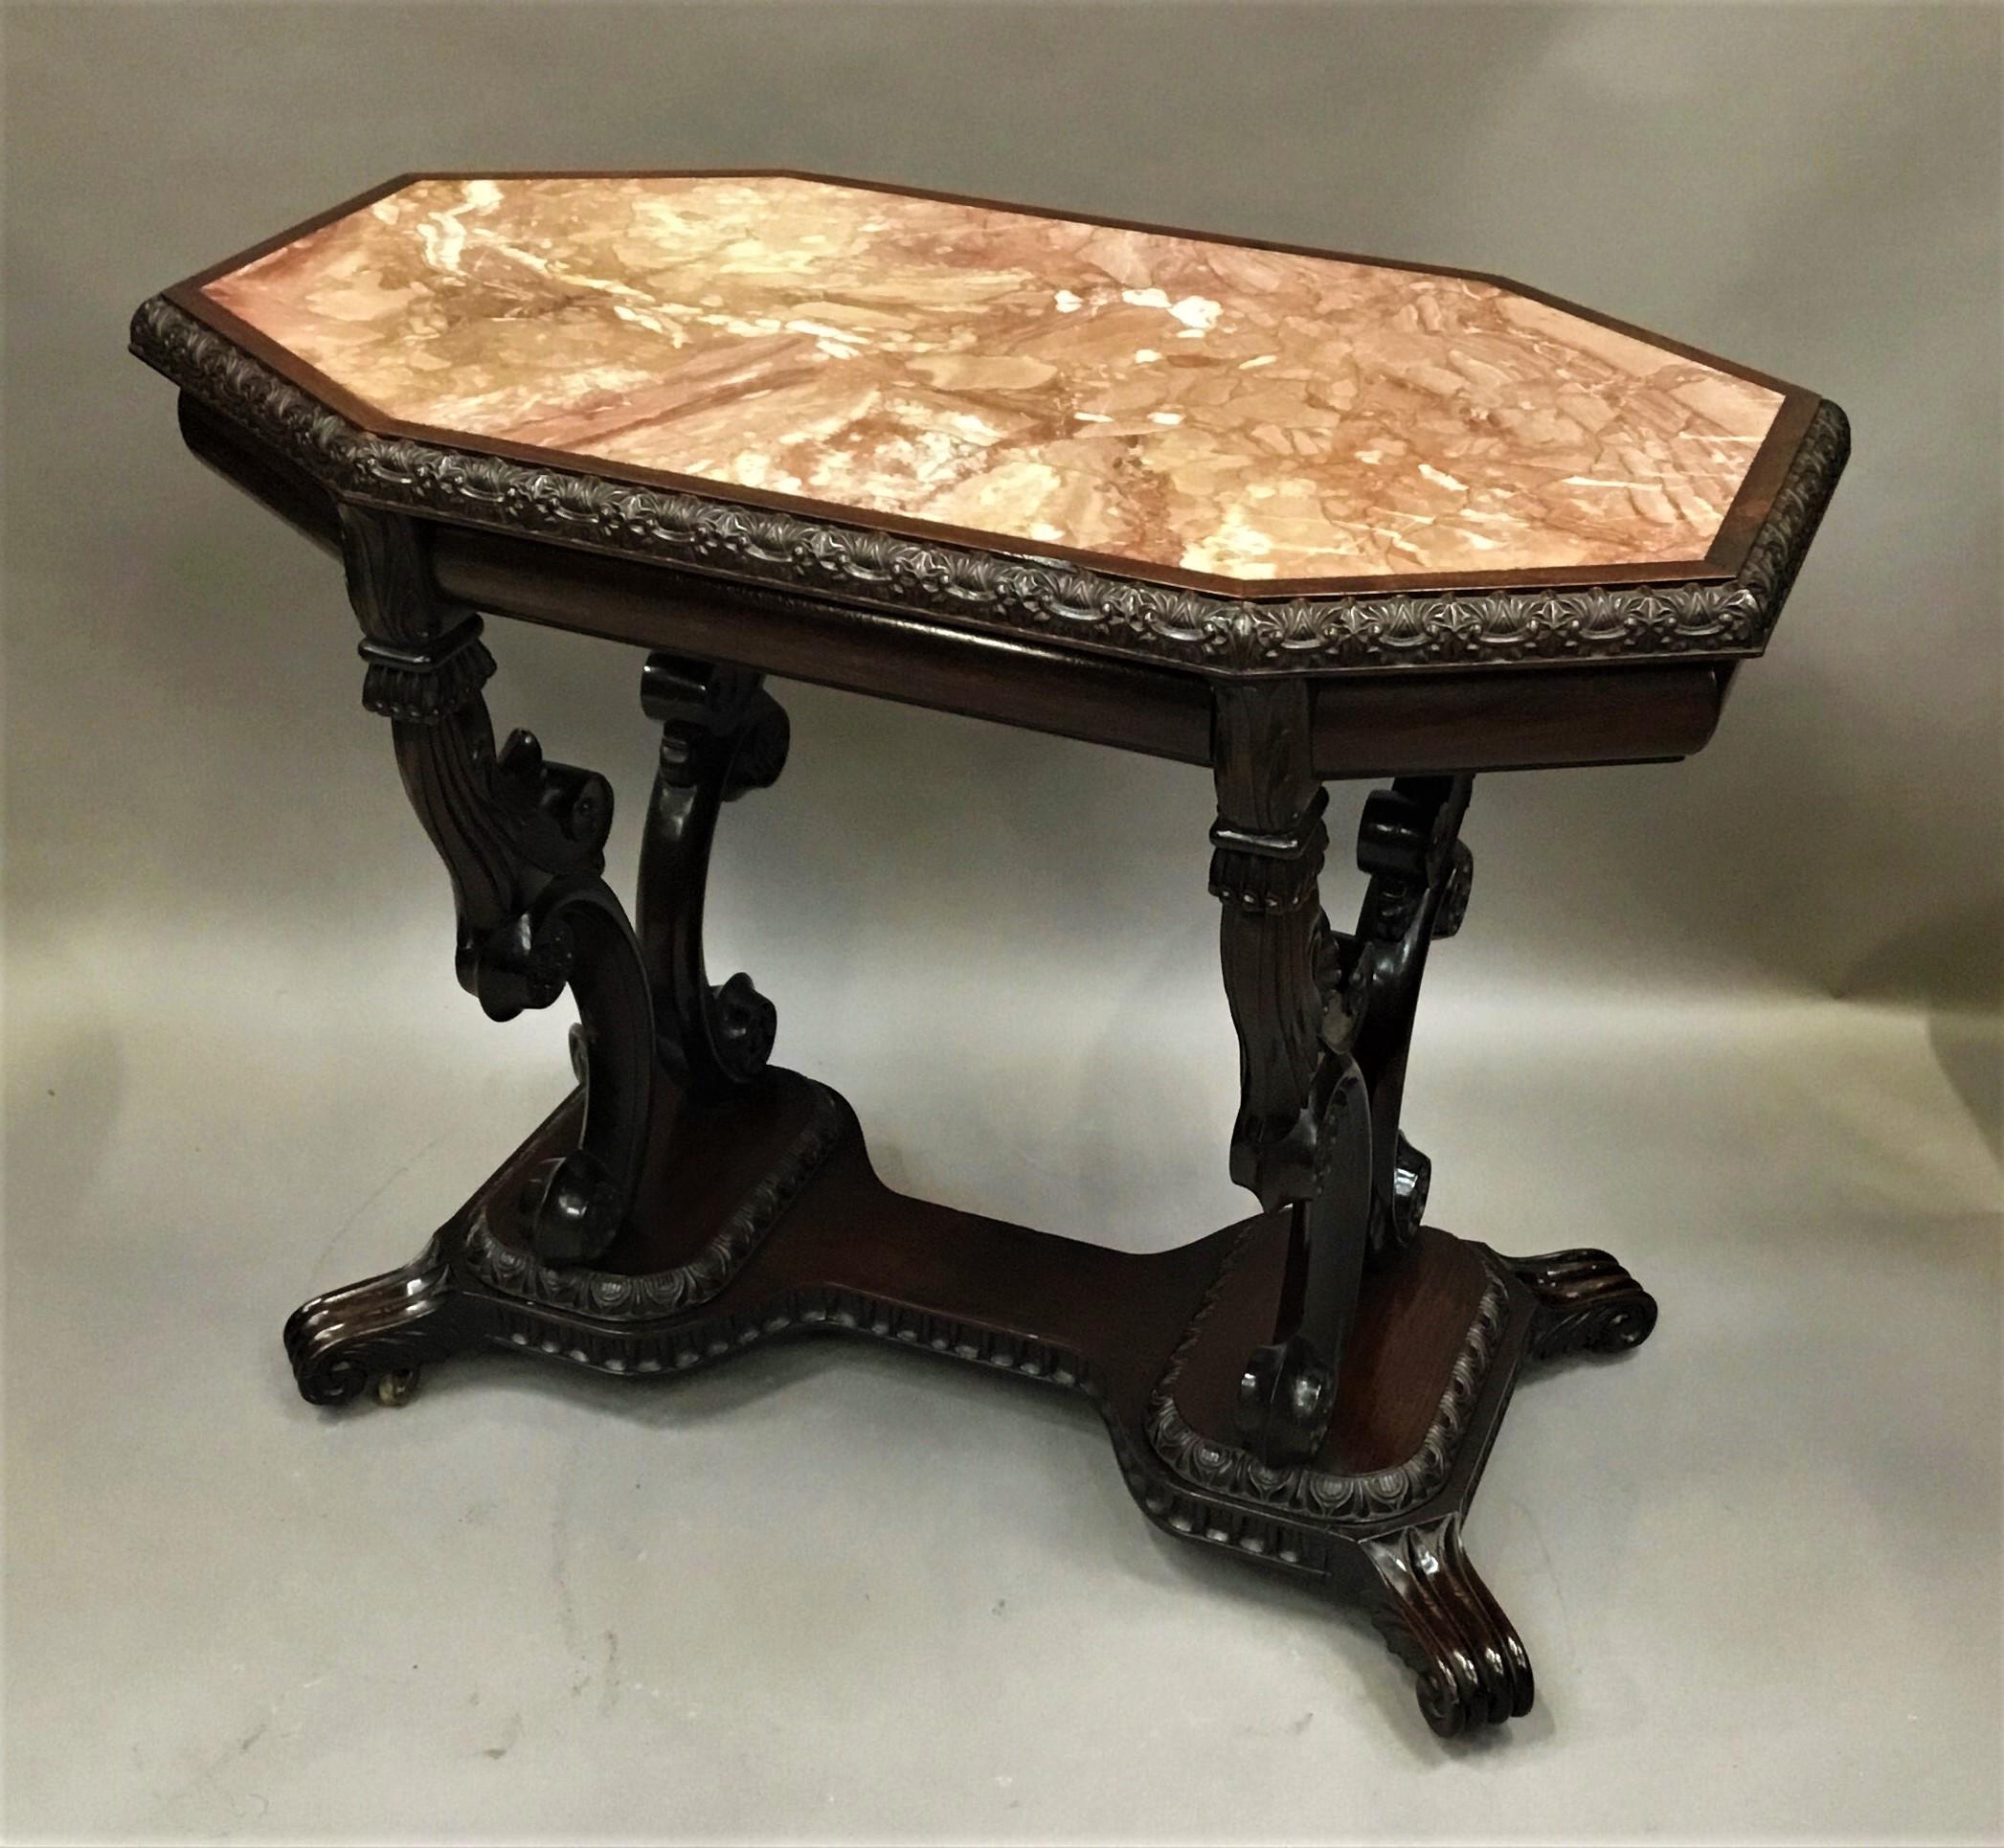 Impressive mid-19th century Anglo-Indian padouk marble top centre table; Ceylonese. The elongated octagonal shaped top, with a finely carved foliate moulded edge, housing the well figured coral colored marble panel. The ogee shaped moulded frieze